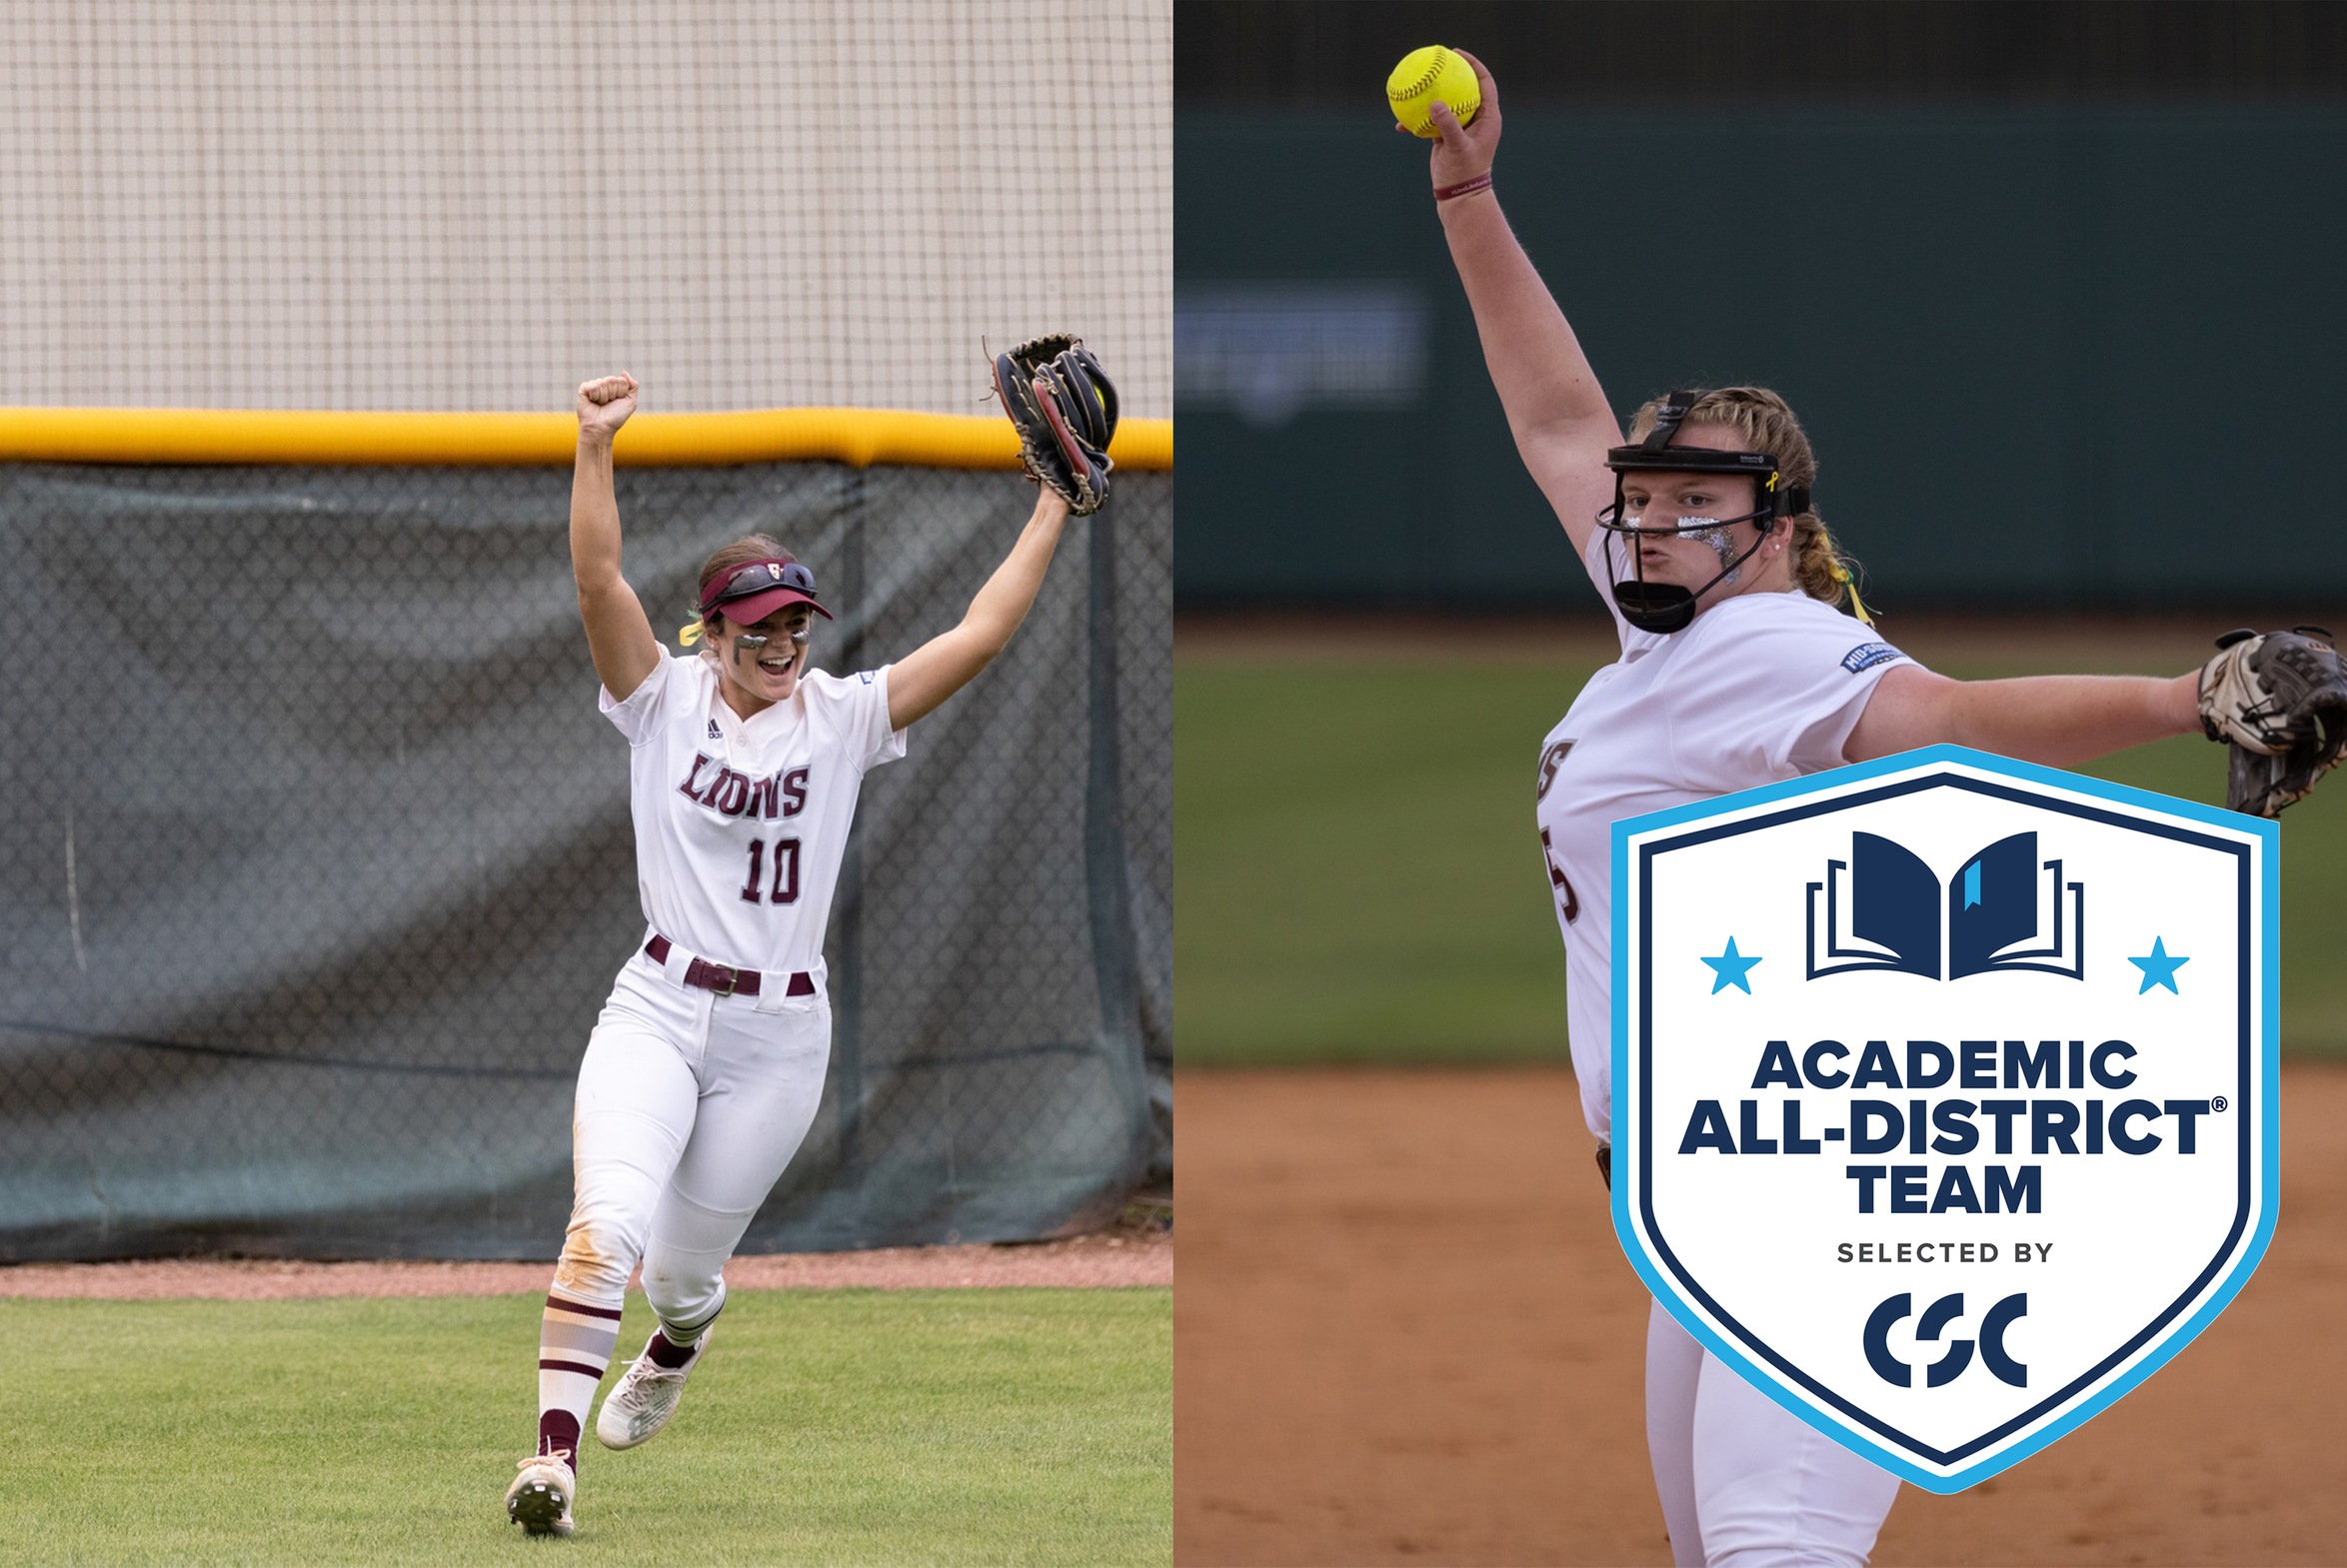 CSC votes Catherine Crabb, Chloe Winters as Academic All-District